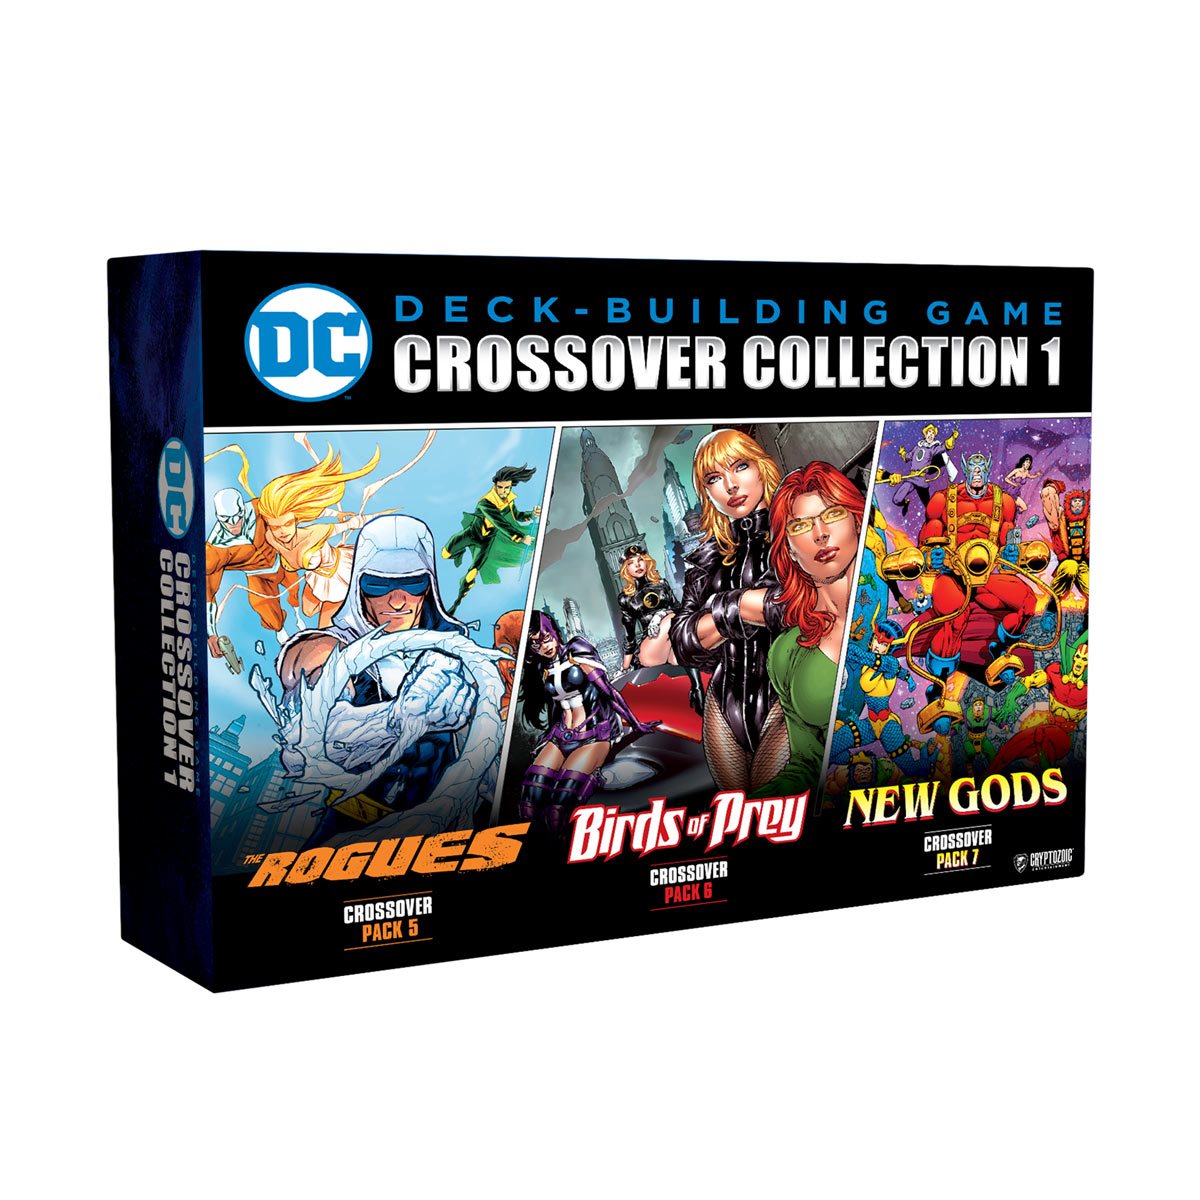 New Gods DC Deck-Building Game Crossover pack #7 